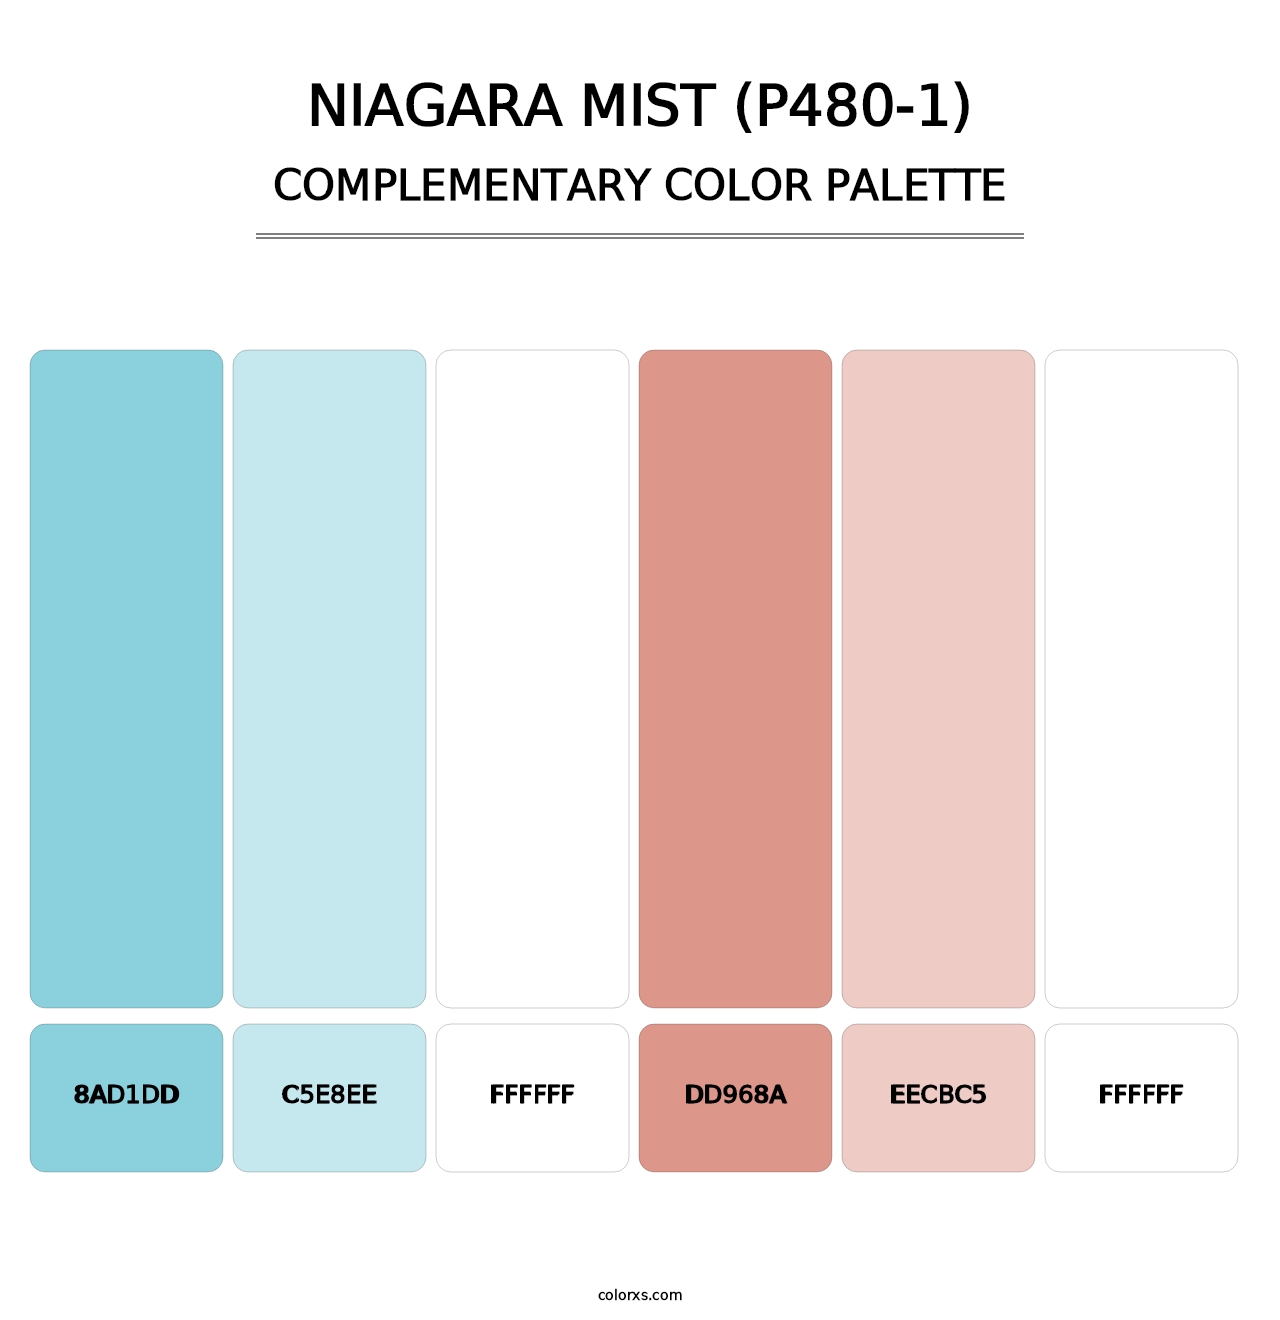 Niagara Mist (P480-1) - Complementary Color Palette